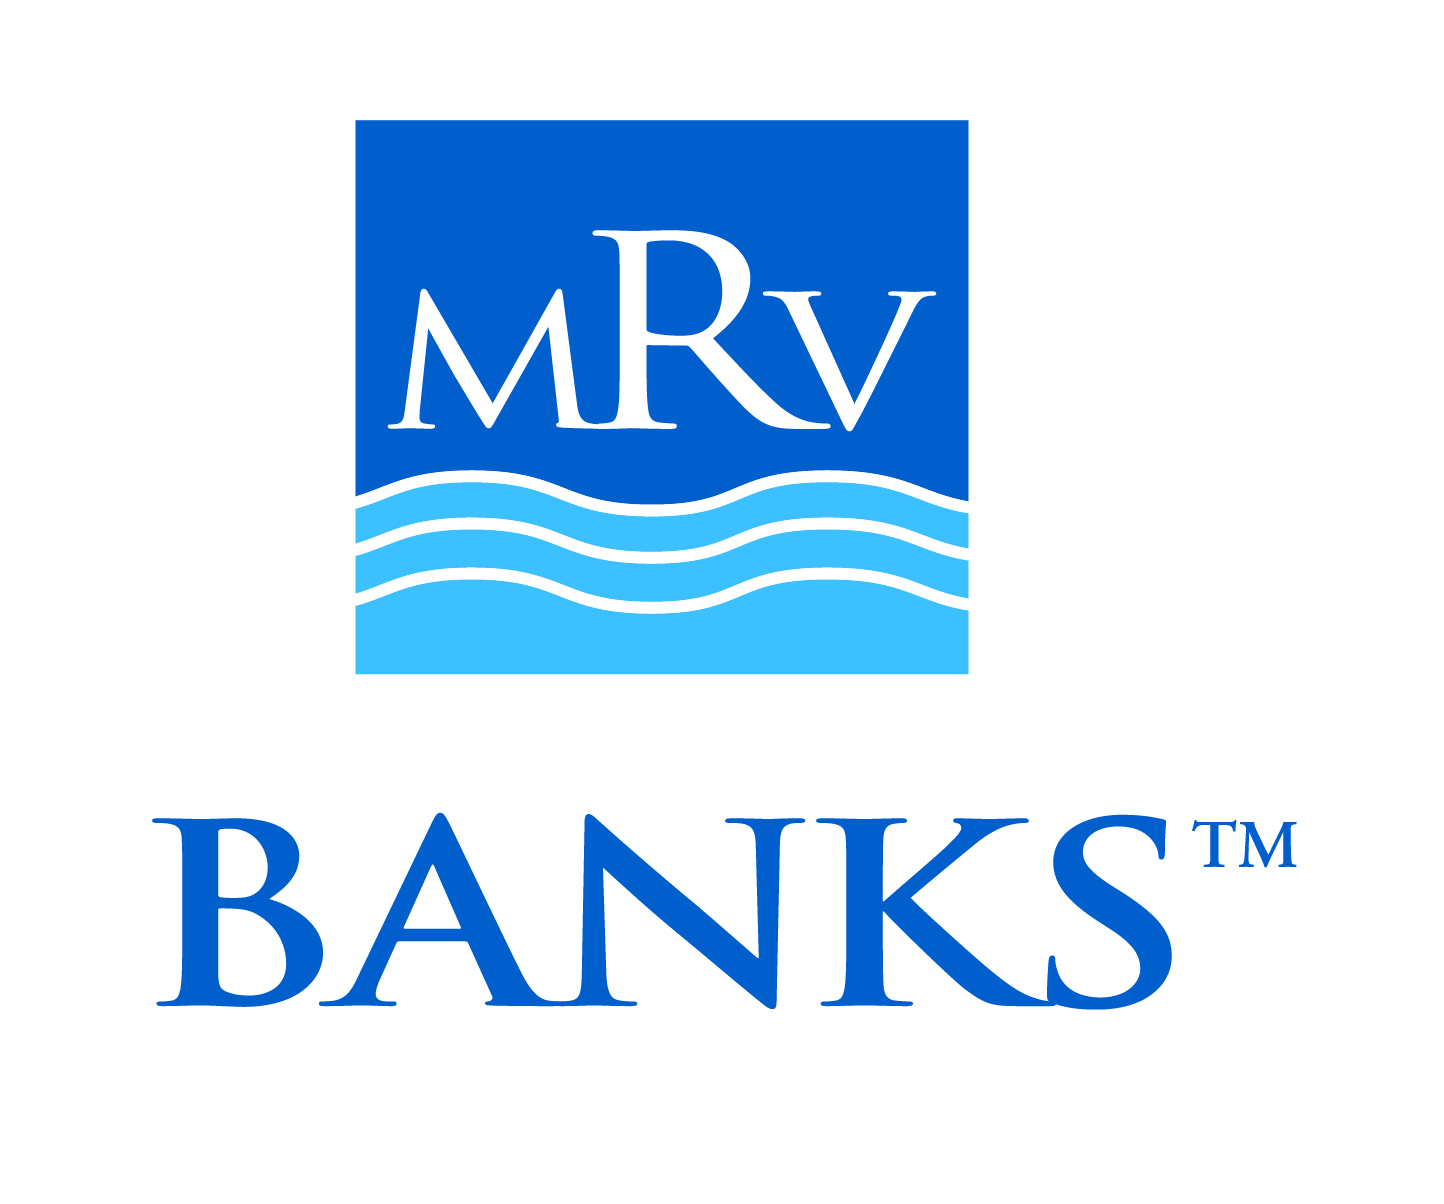 MRV Banks Logo FINAL CHOICE Color CMYK Stacked (1)